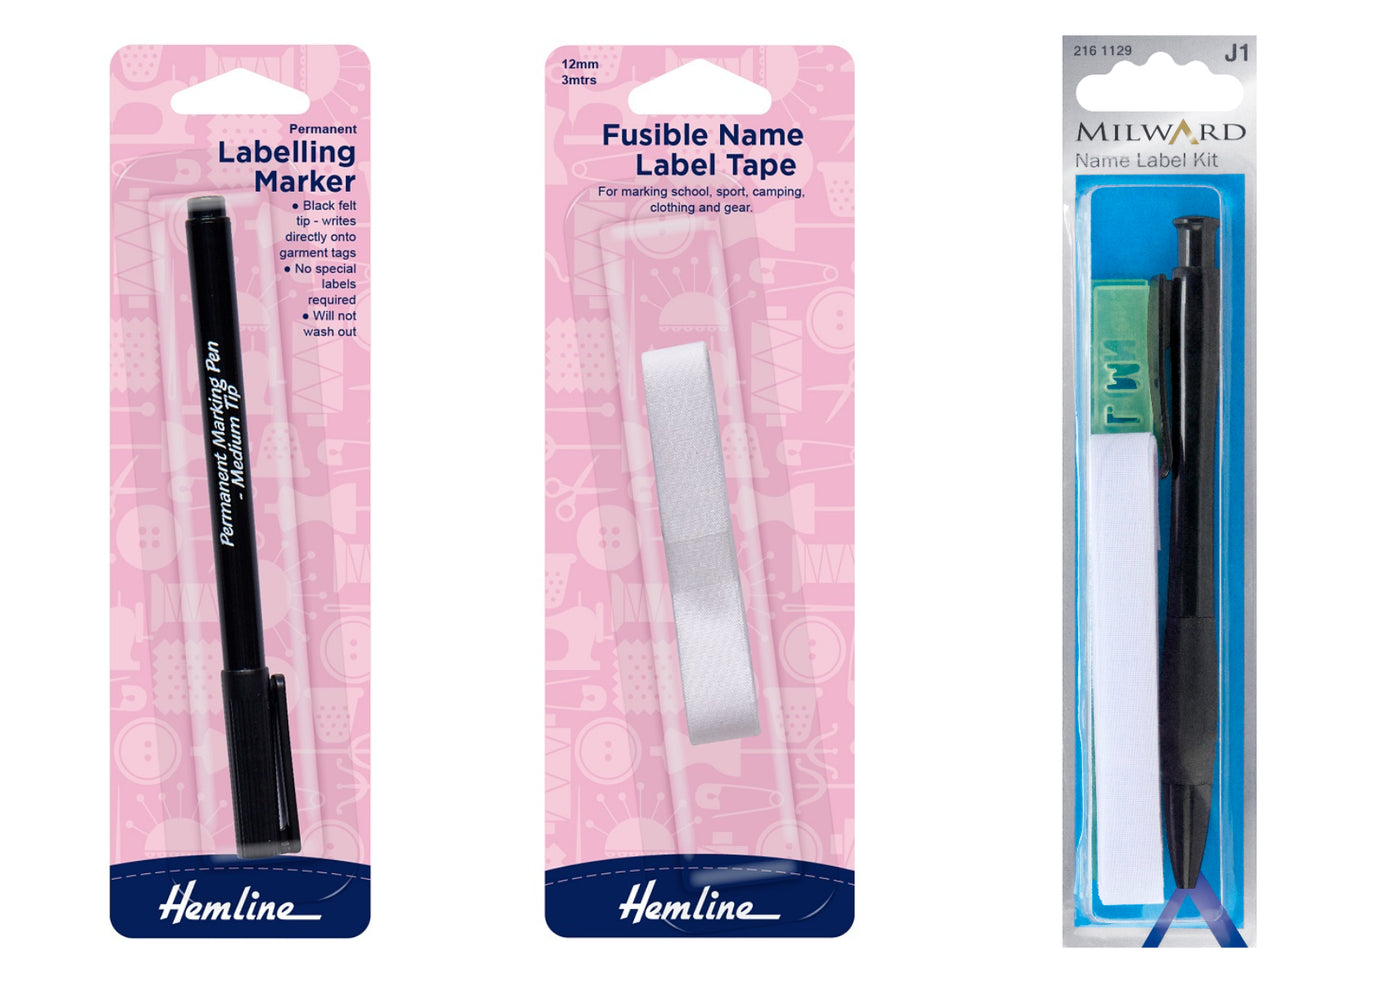 Iron-on name label tape/permanent label pen/pen set. Marking school and sports wear.